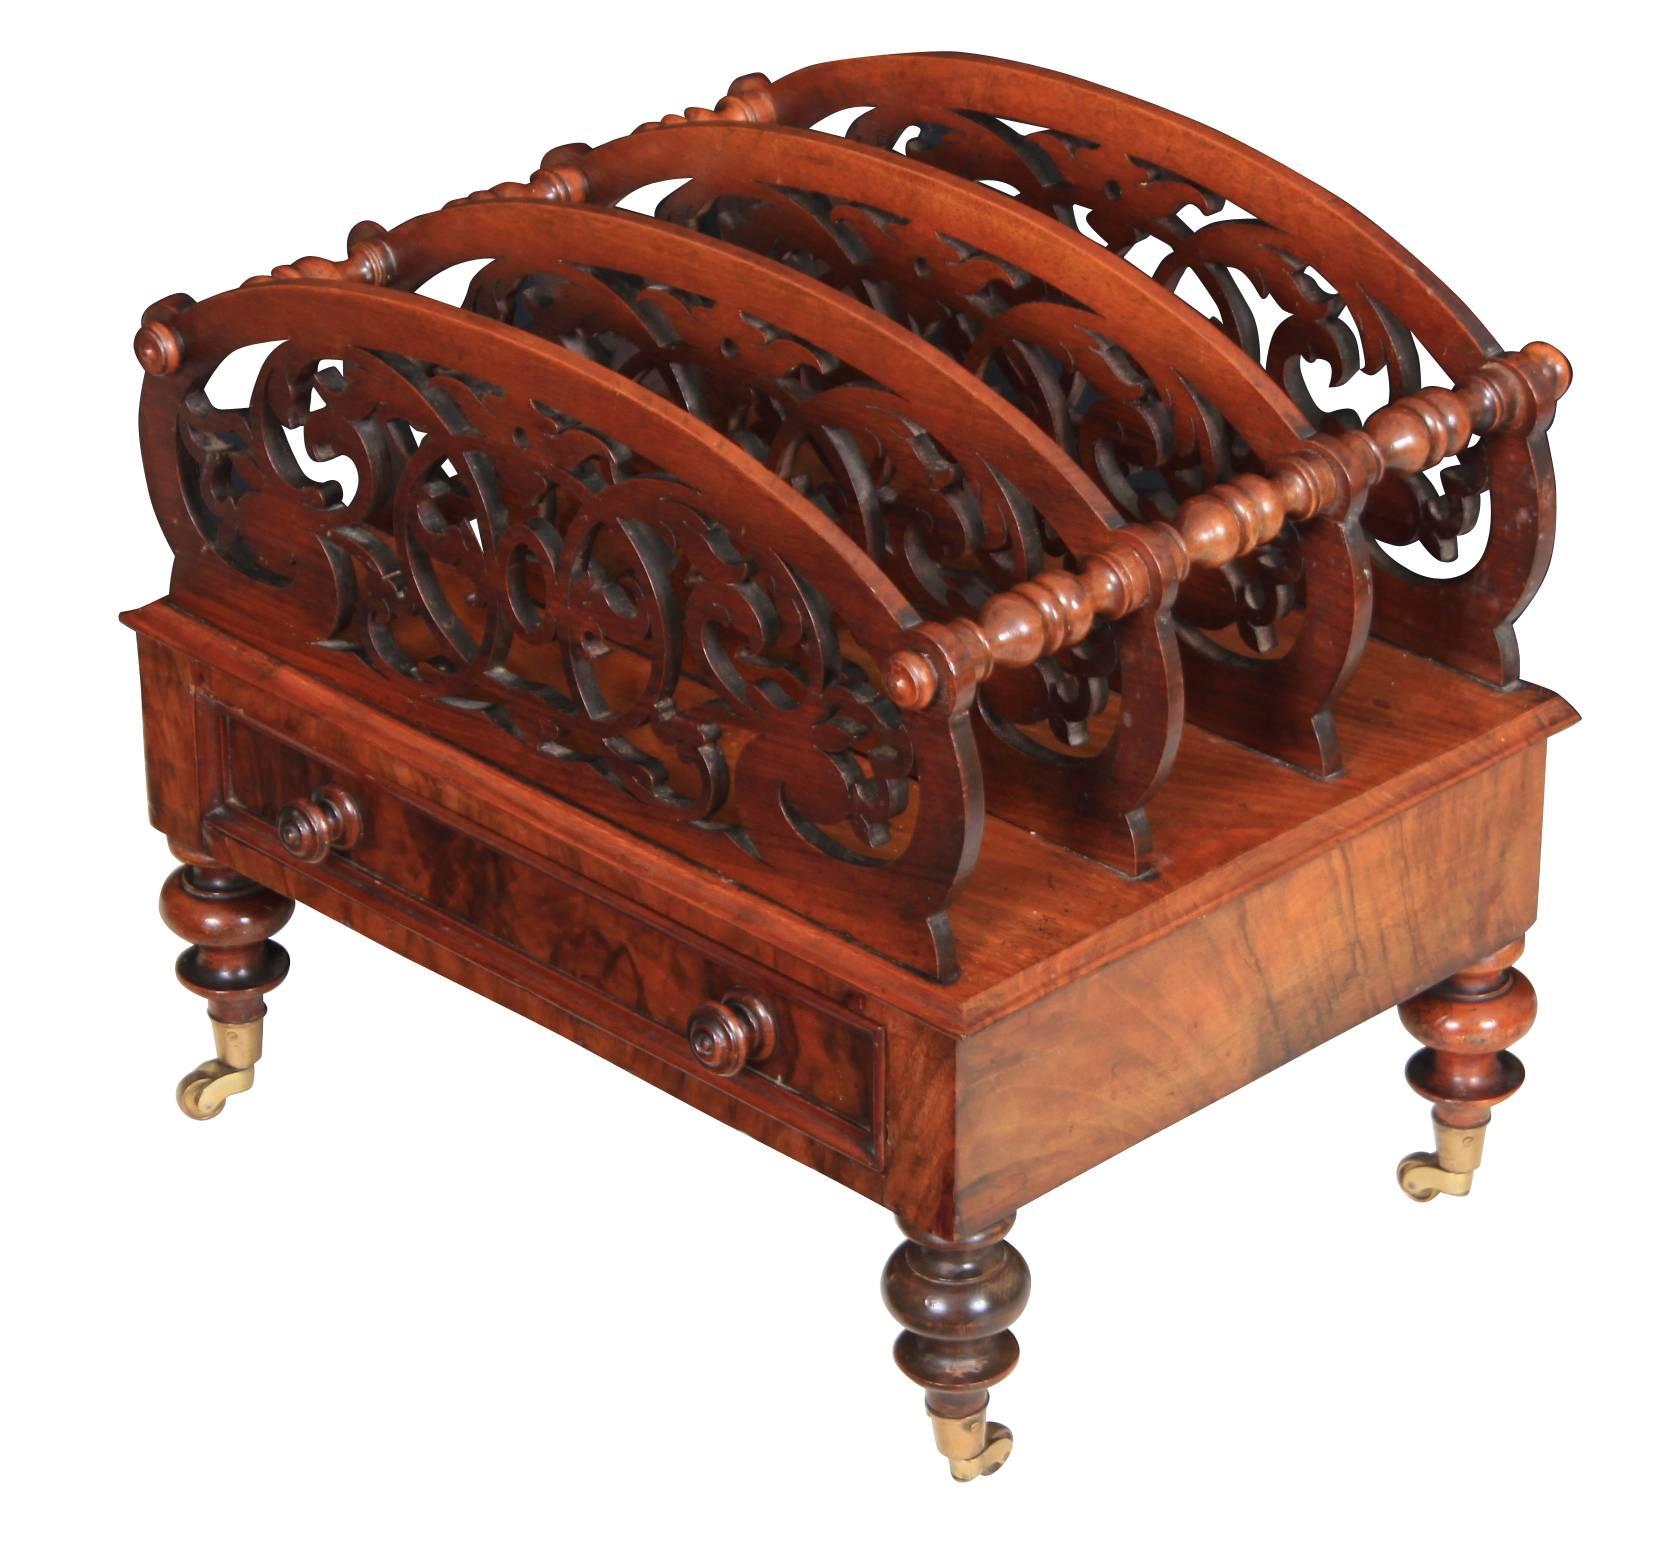 English, circa 1870.
This lovely decorative magazine rack is in great condition.
Boasting beautiful intricate carved dividers held together with turned support rails.
It has a single drawer of solid mahogany dovetailed construction with bun